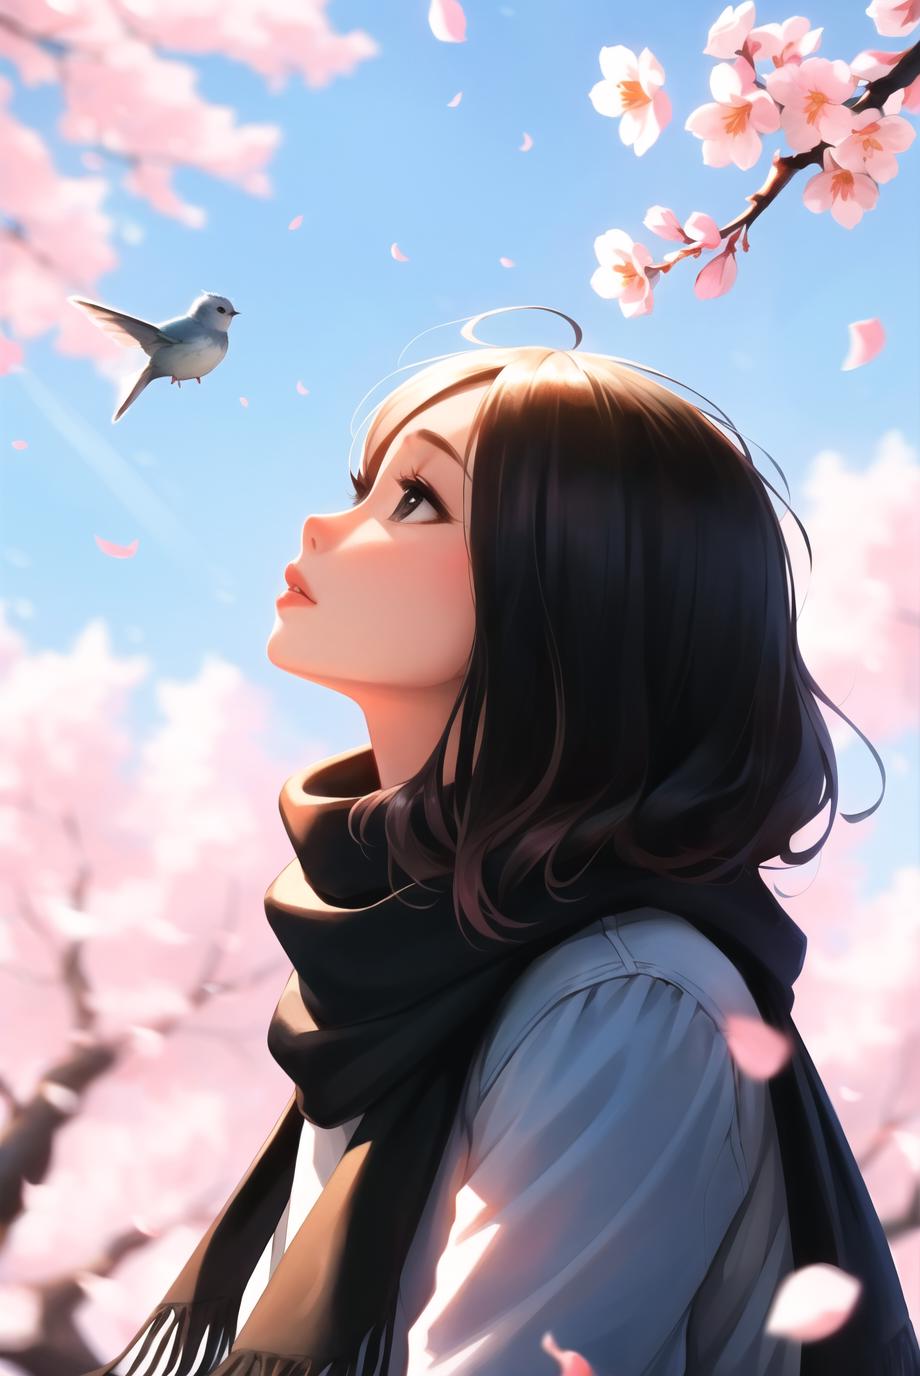 A Woman with Flowers in Her Hair Looking Up at a Bird.